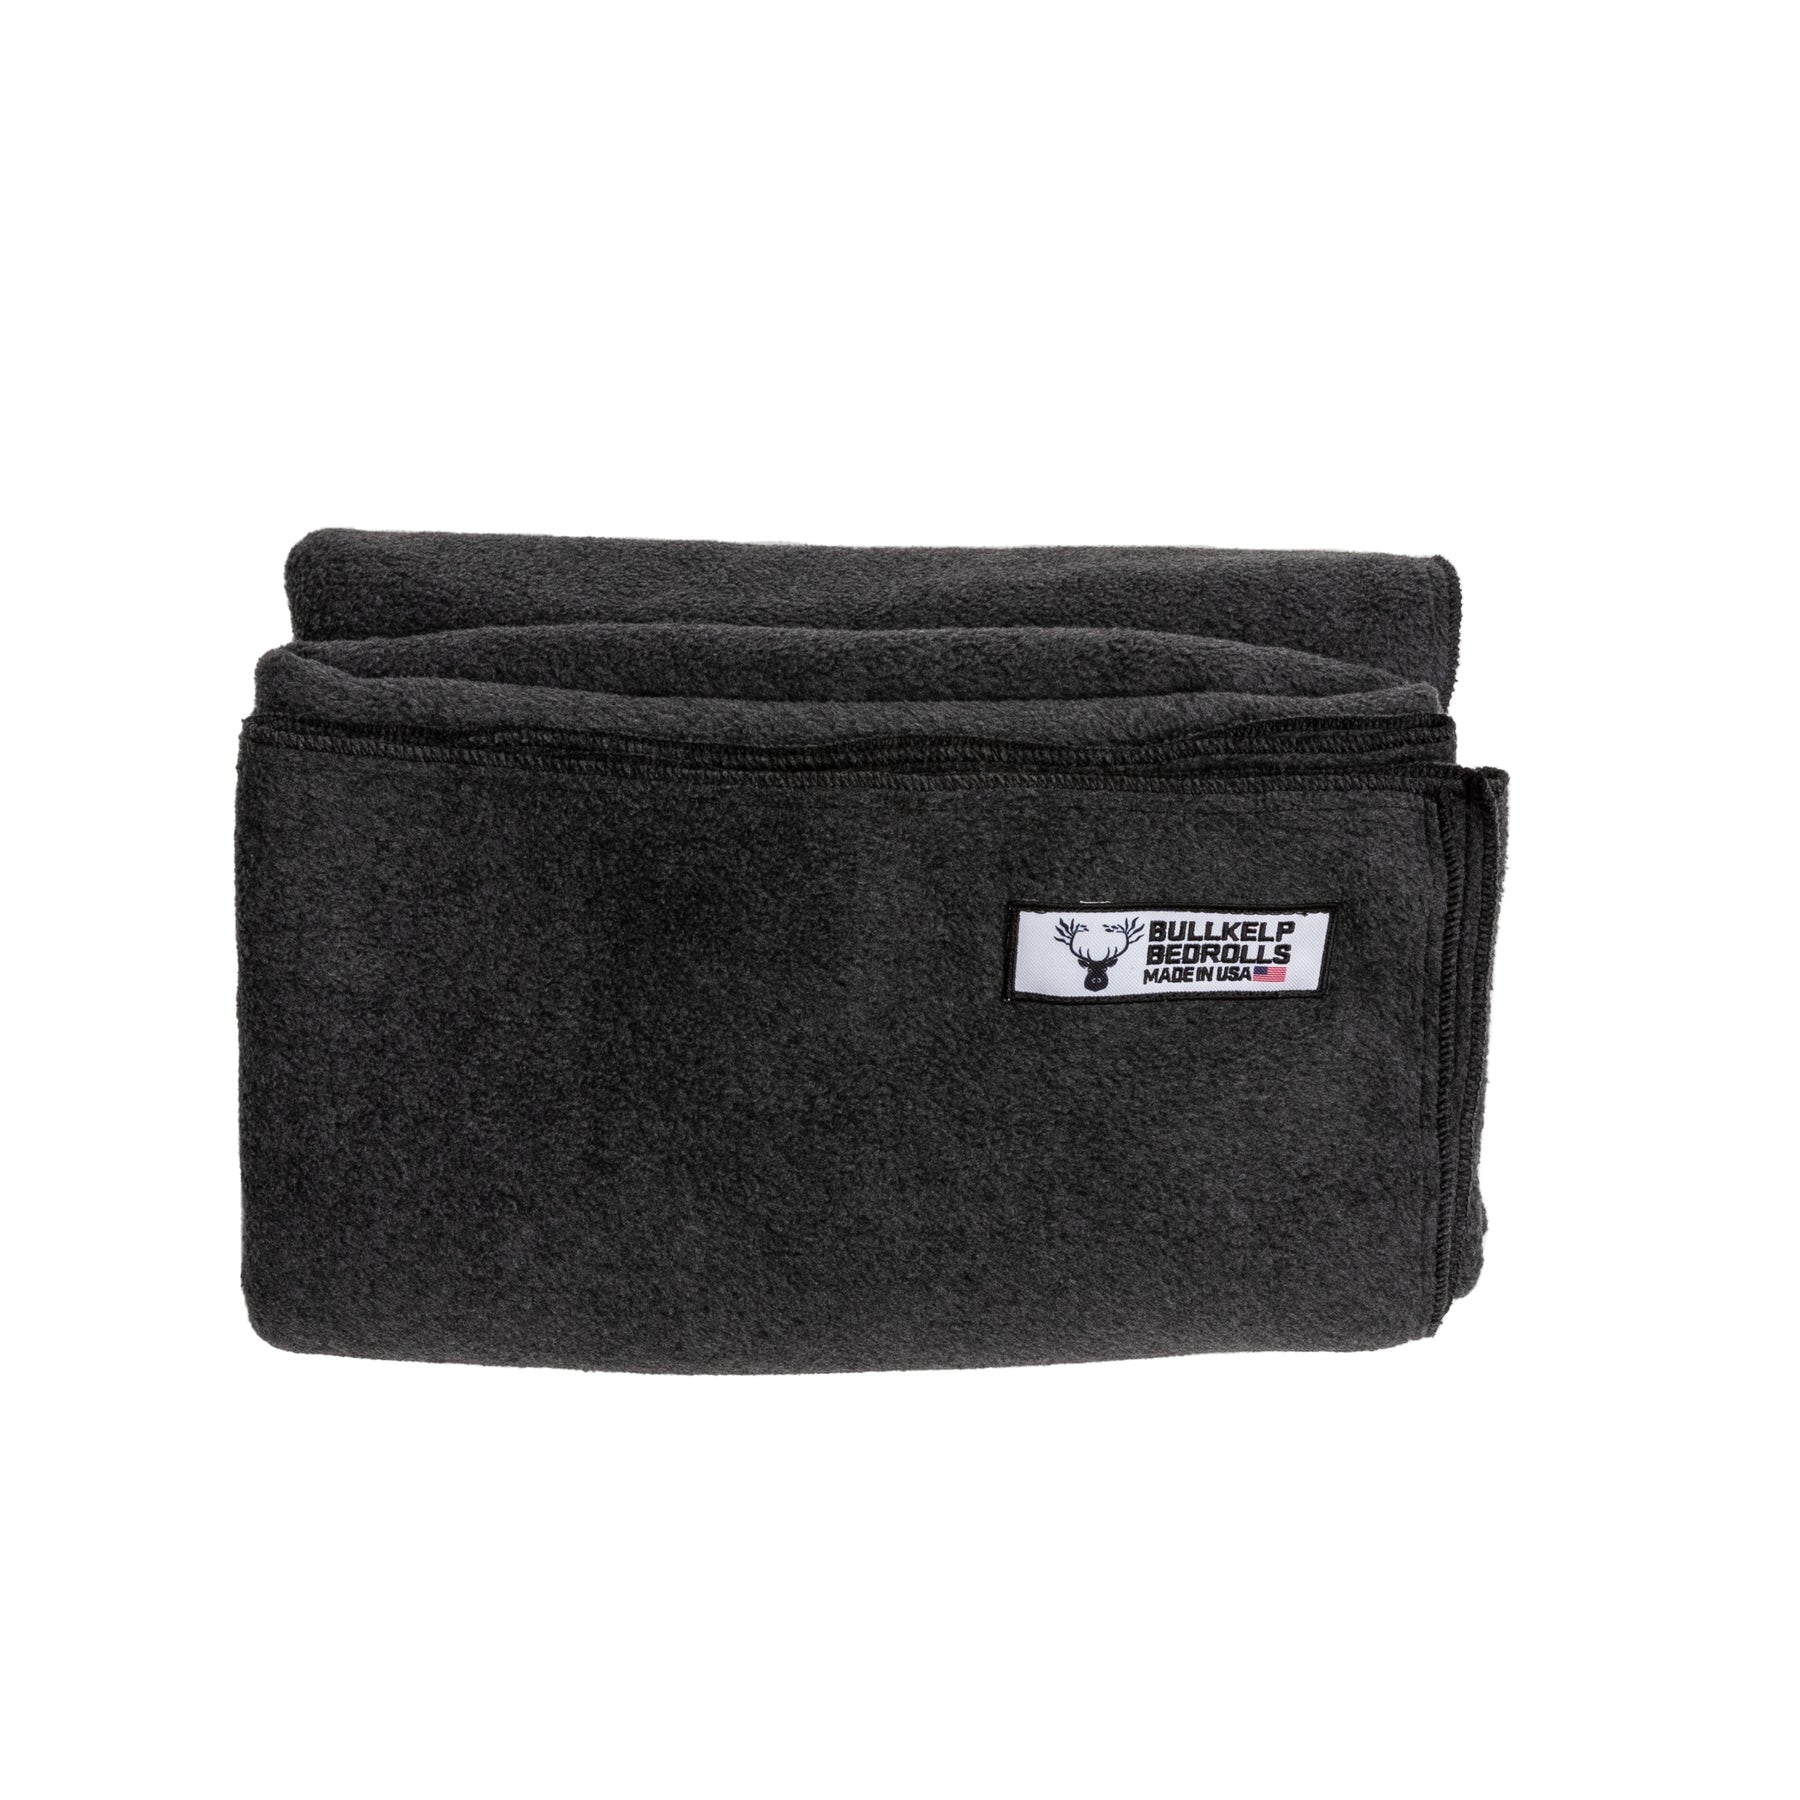 STATION BEDPAC™ *w/ free camp pillow